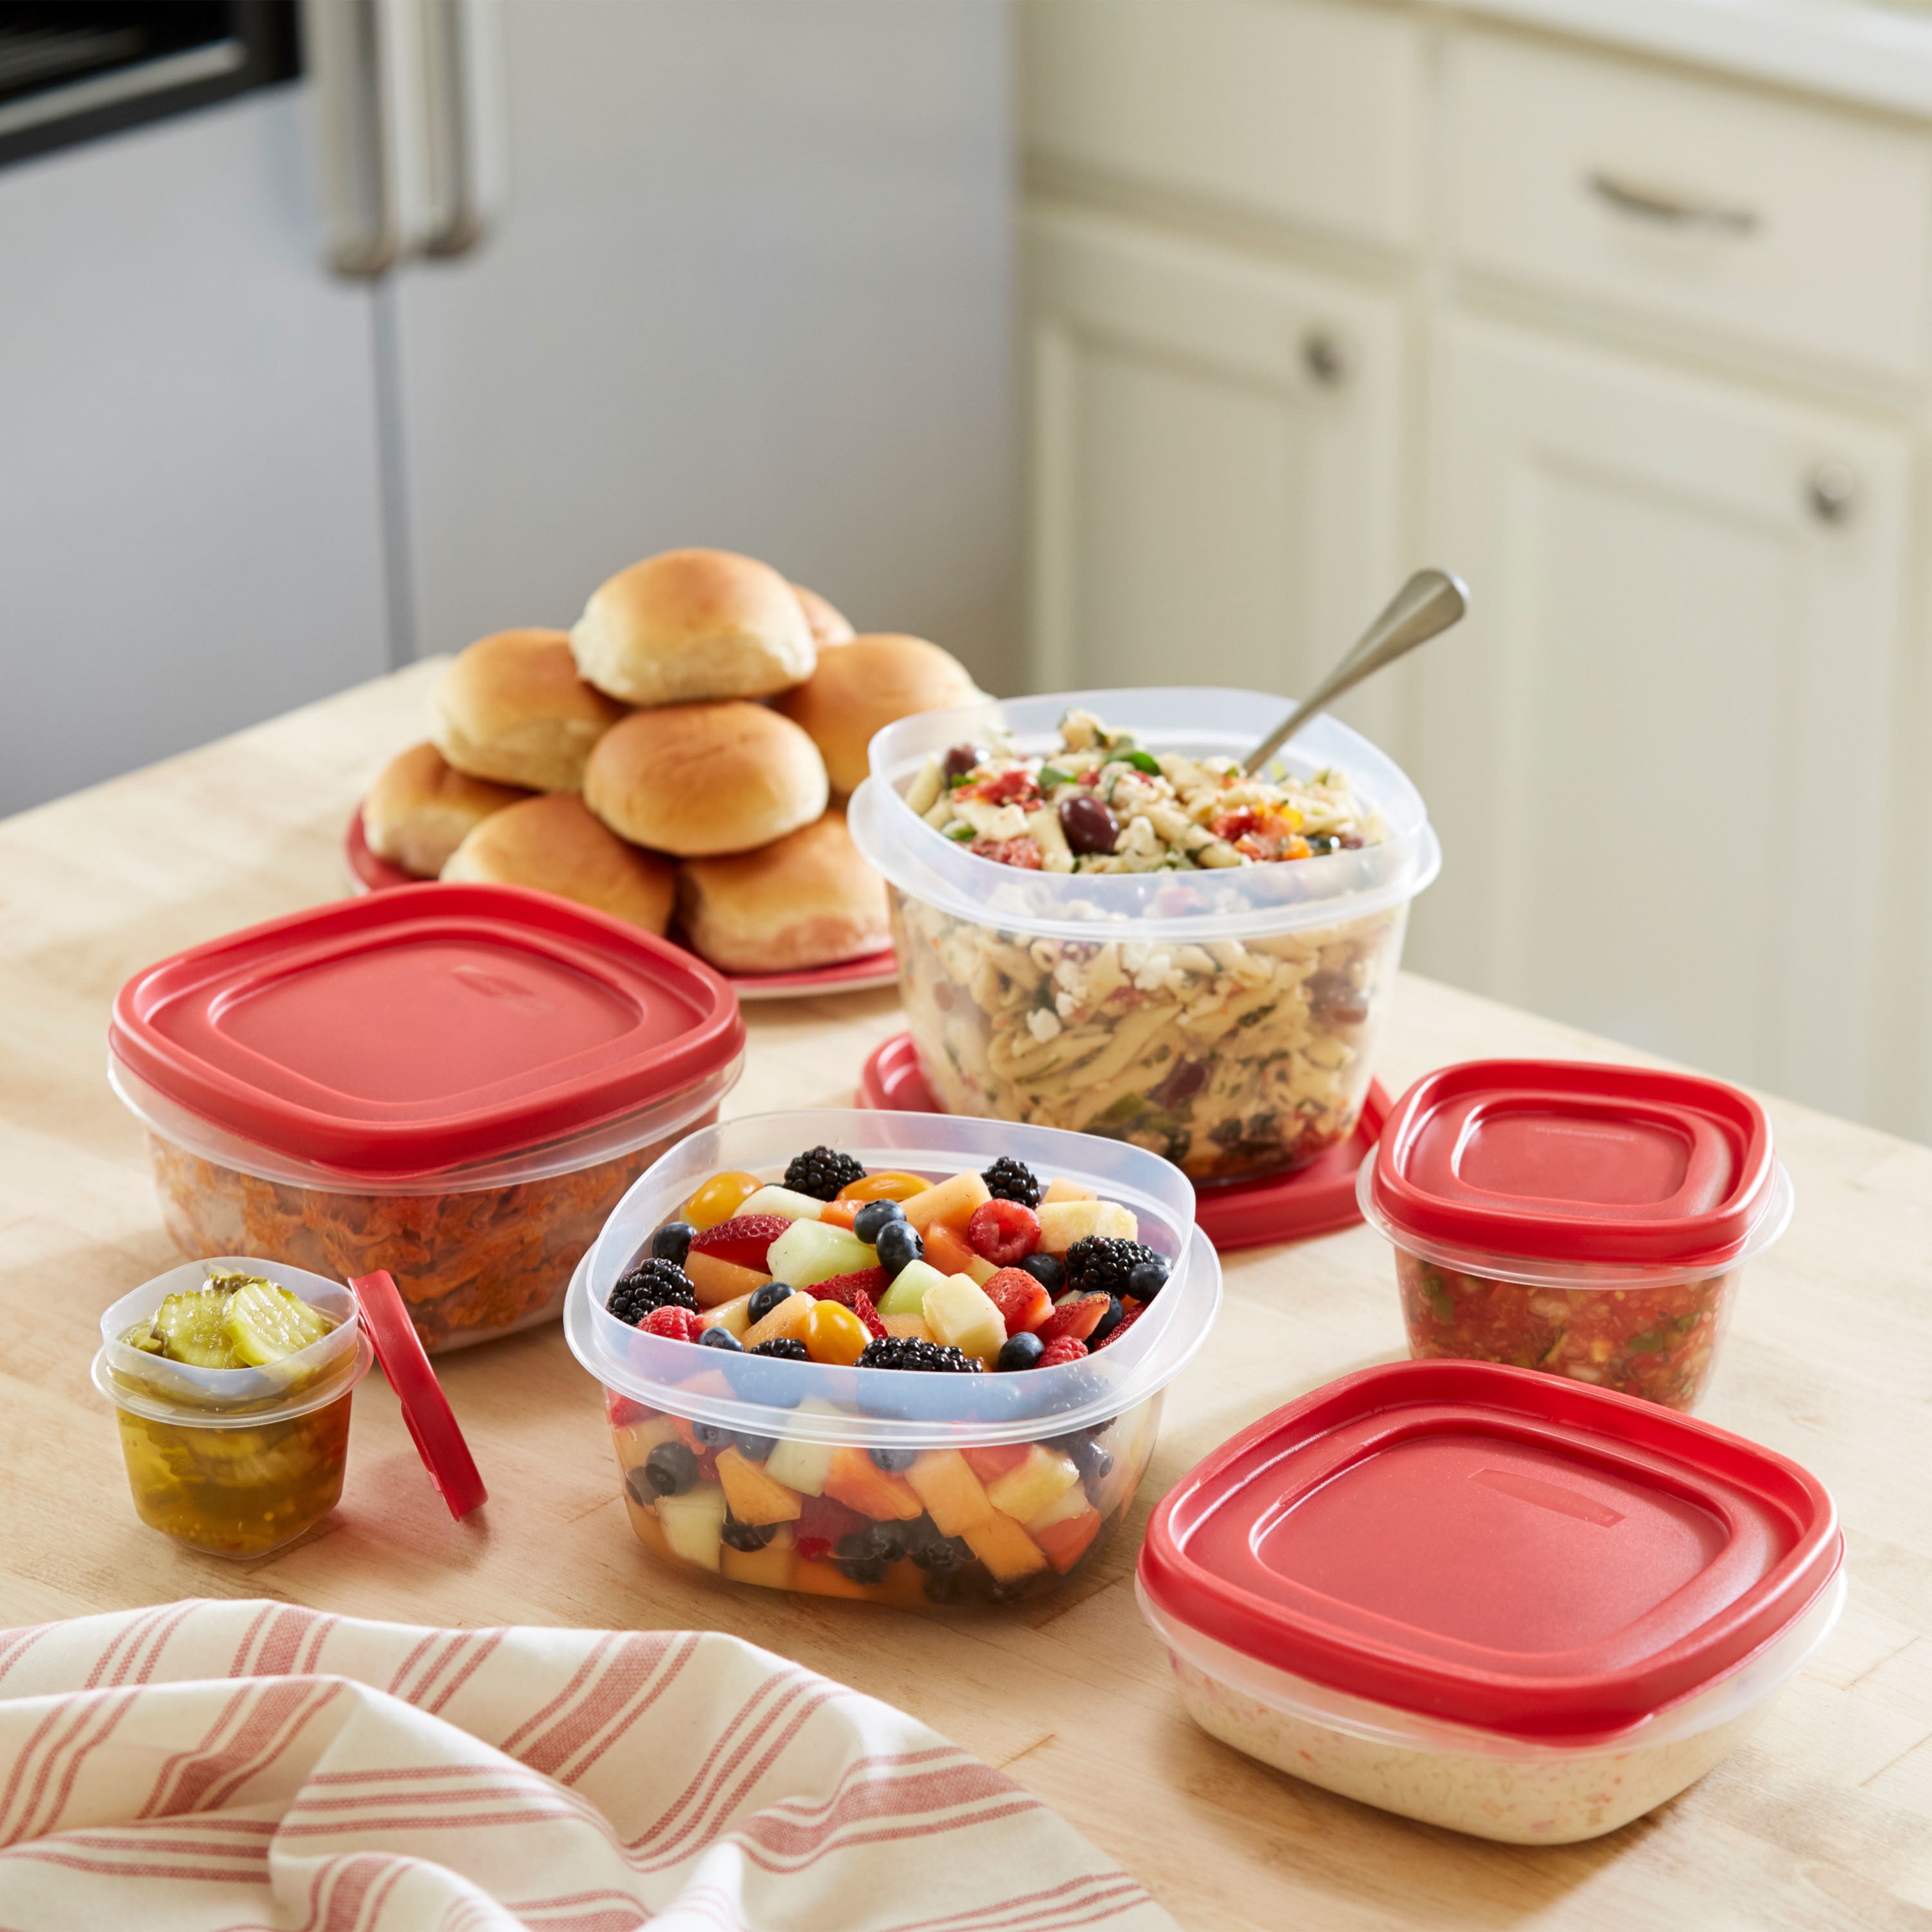 Rubbermaid Easy Find Vented Lids Food Storage Containers, 38